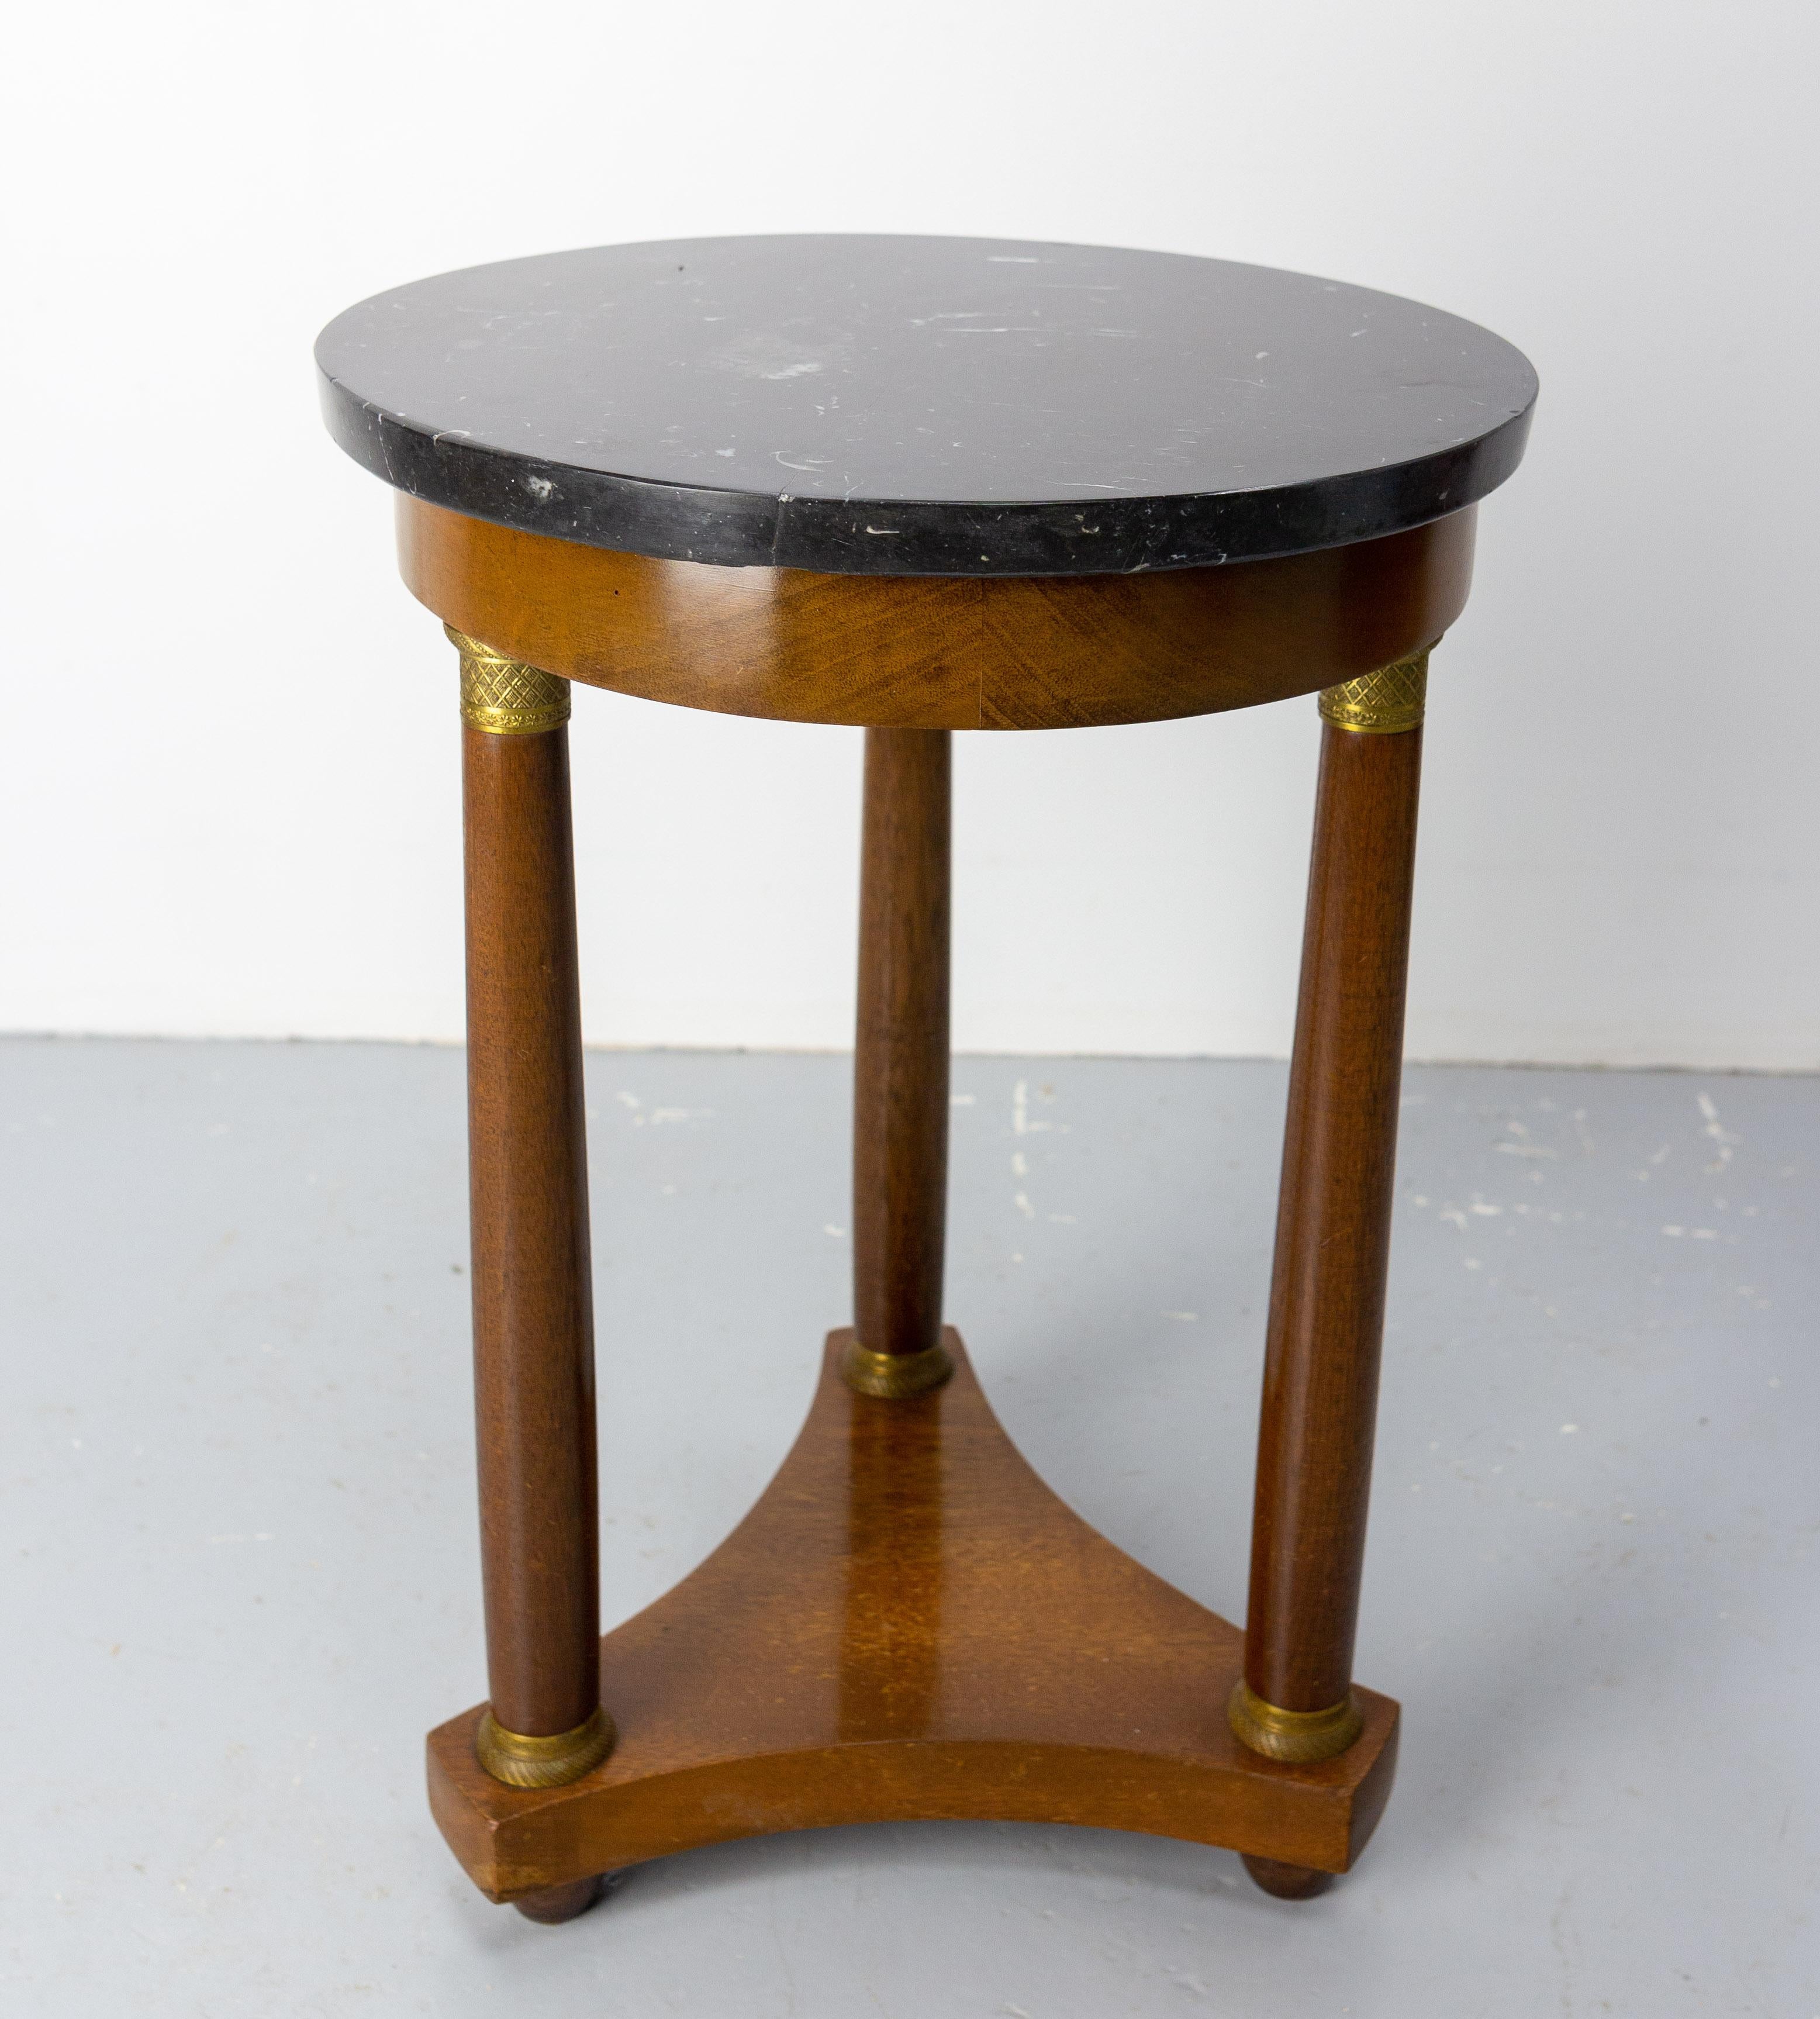 20th Century French 1960 Iroko & Marble Sellette or Plant Holder Three Legs Empire St, c 1960 For Sale